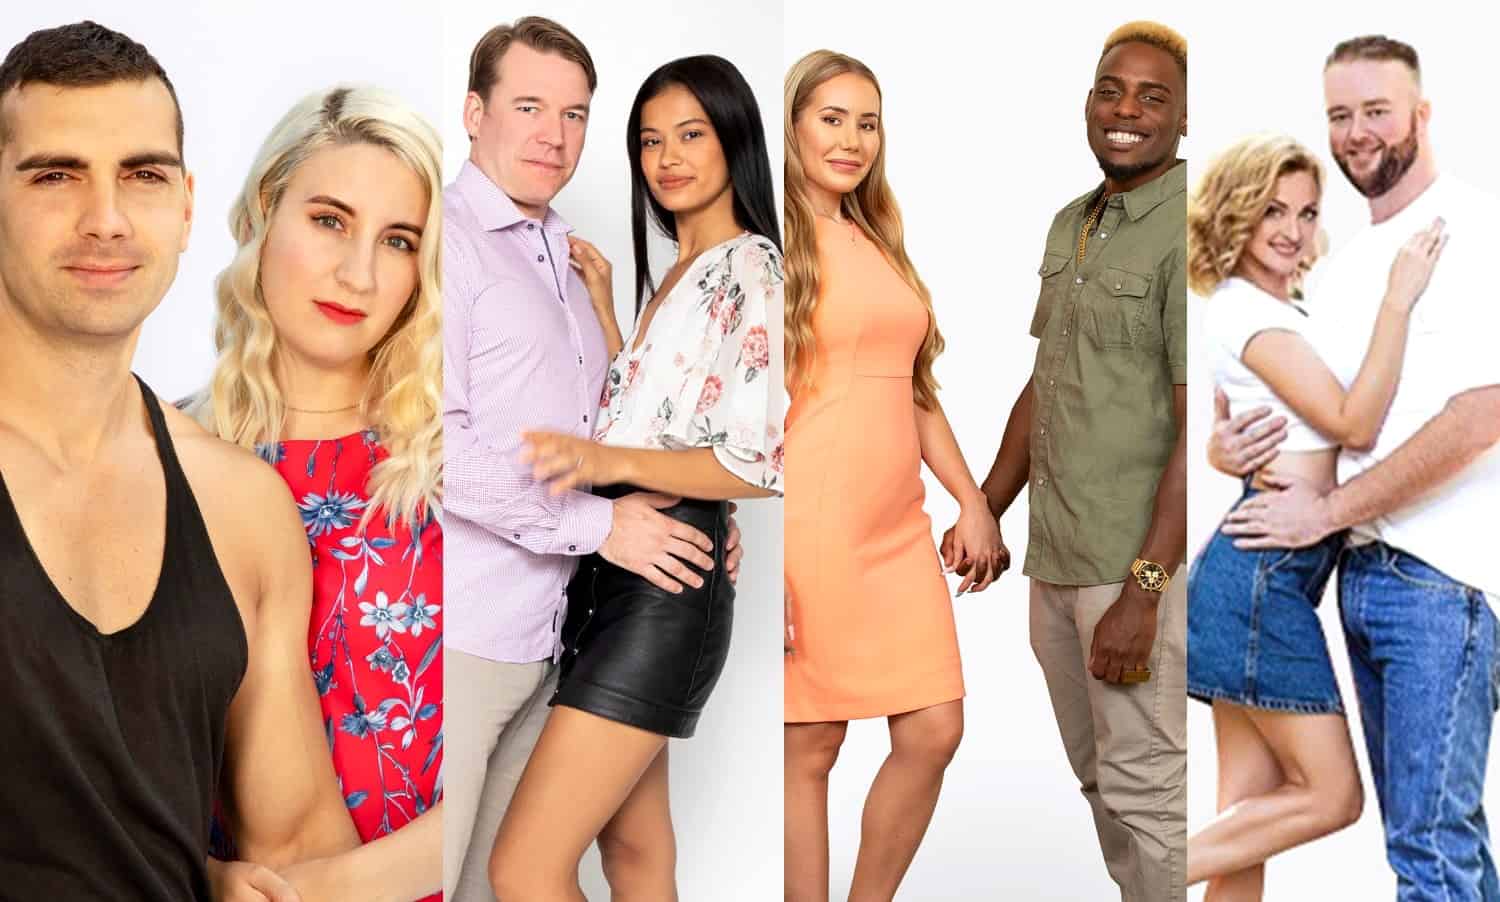 PHOTOS VIDEO: Meet the 90 Day Fiancé Season 7 Cast and See the Drama-Packed Video Trailer!